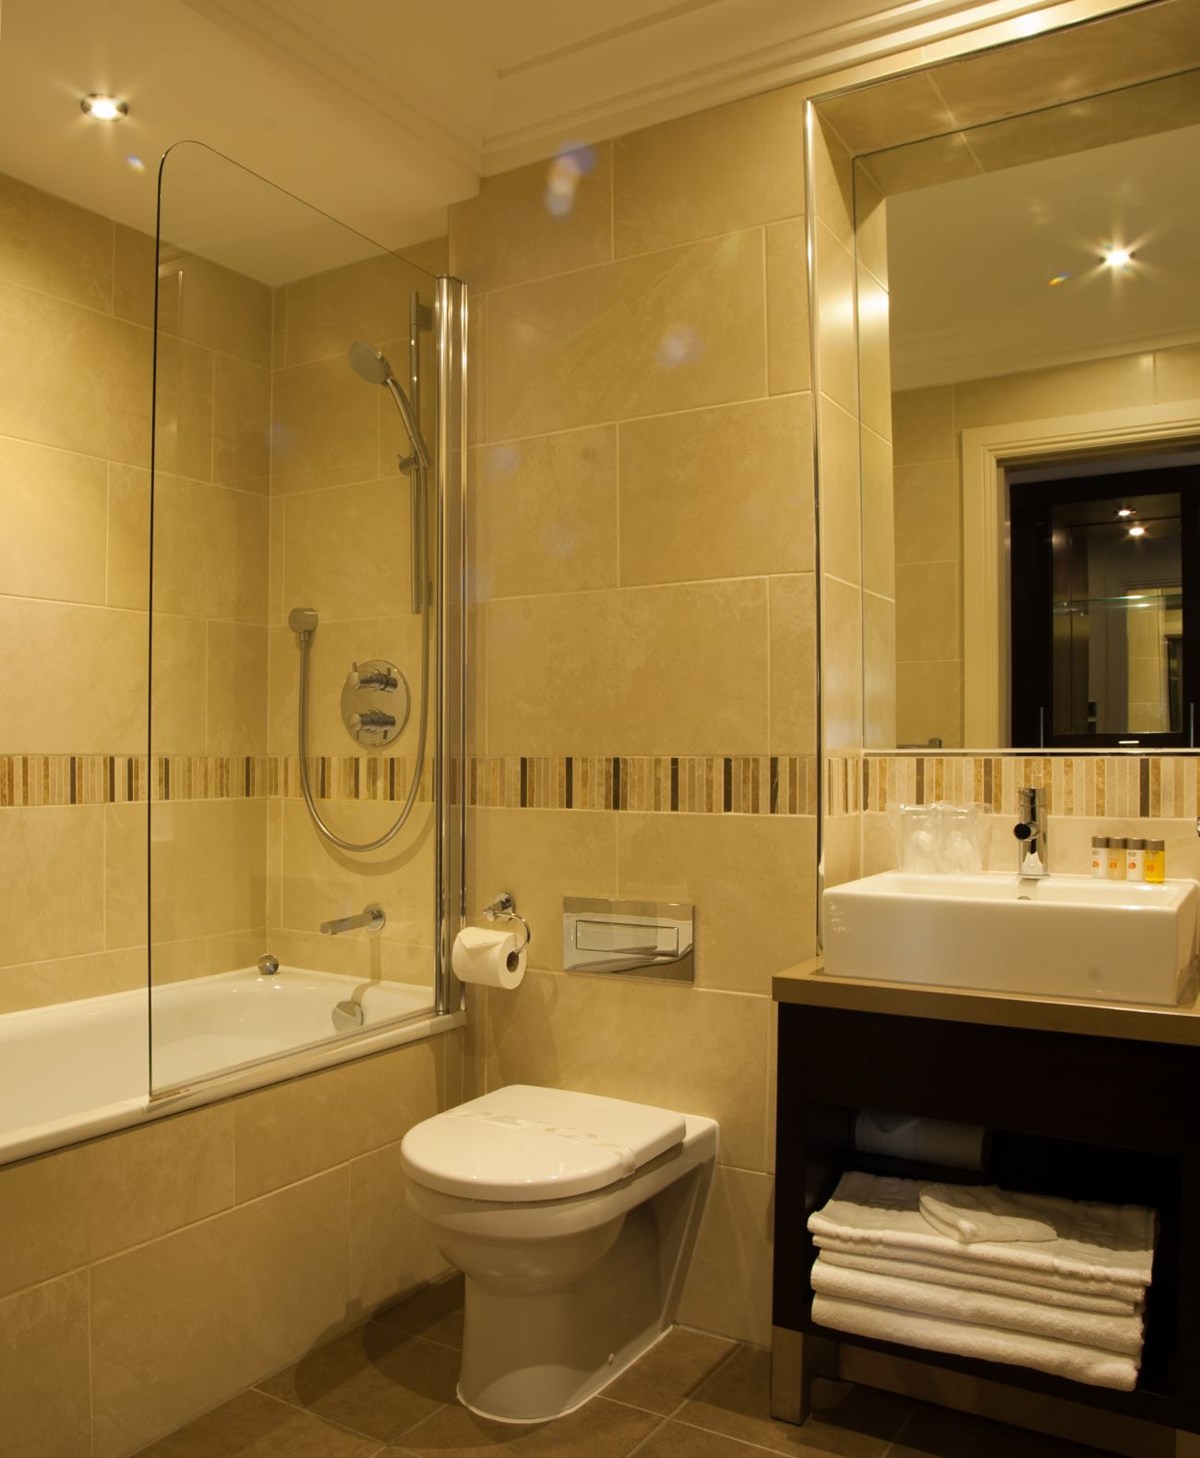 An image of a bathroom at the Dumfries Arms Hotel in Ayrshire.